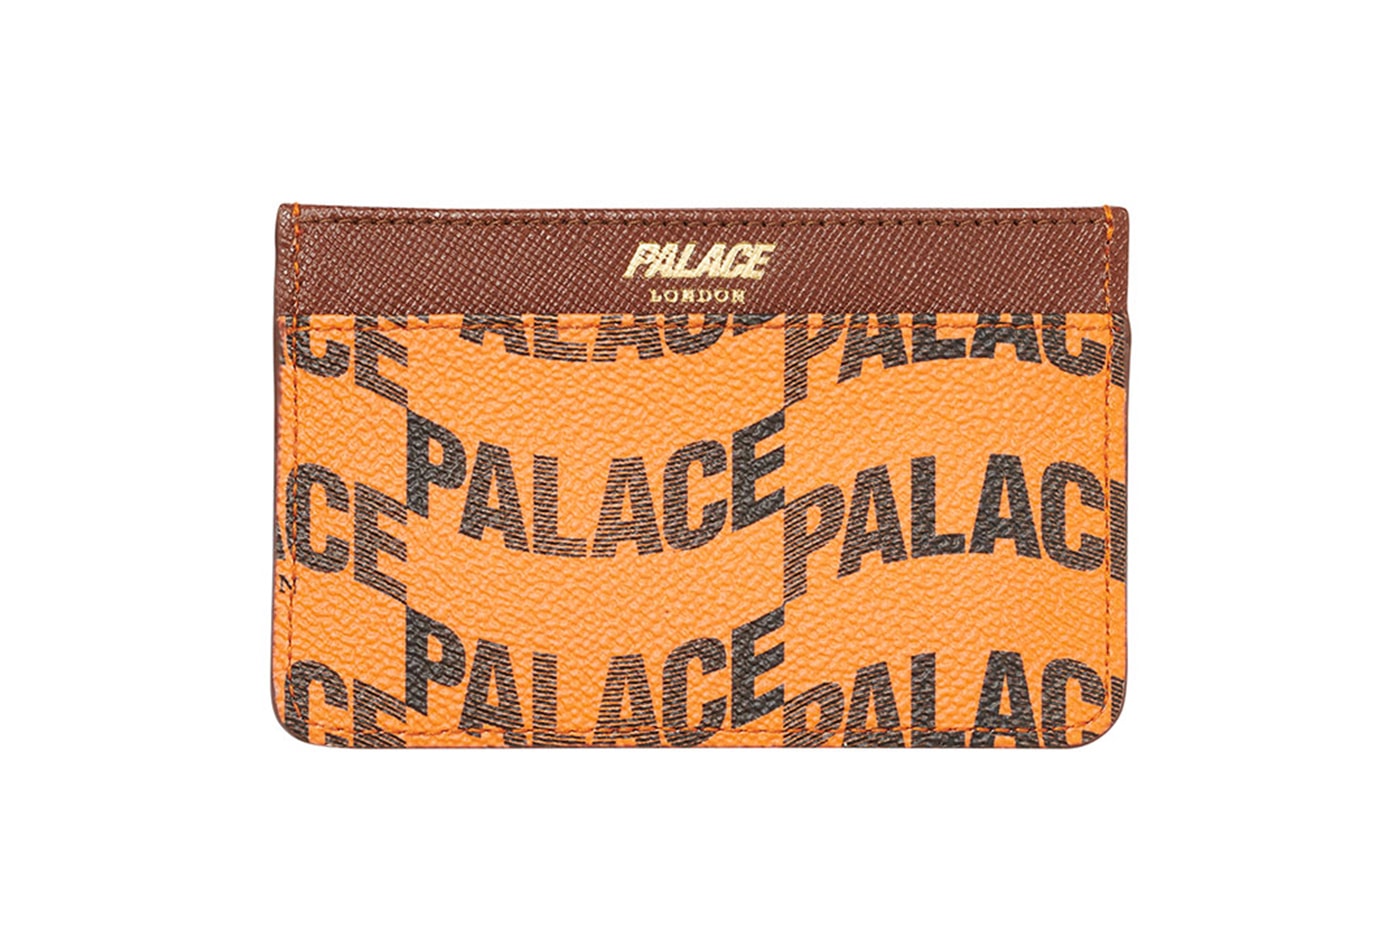 Palace Summer 2020 Accessories jamal smith london skull tri-ferg palace london skateboarding necklaces snakes stickers card holders 